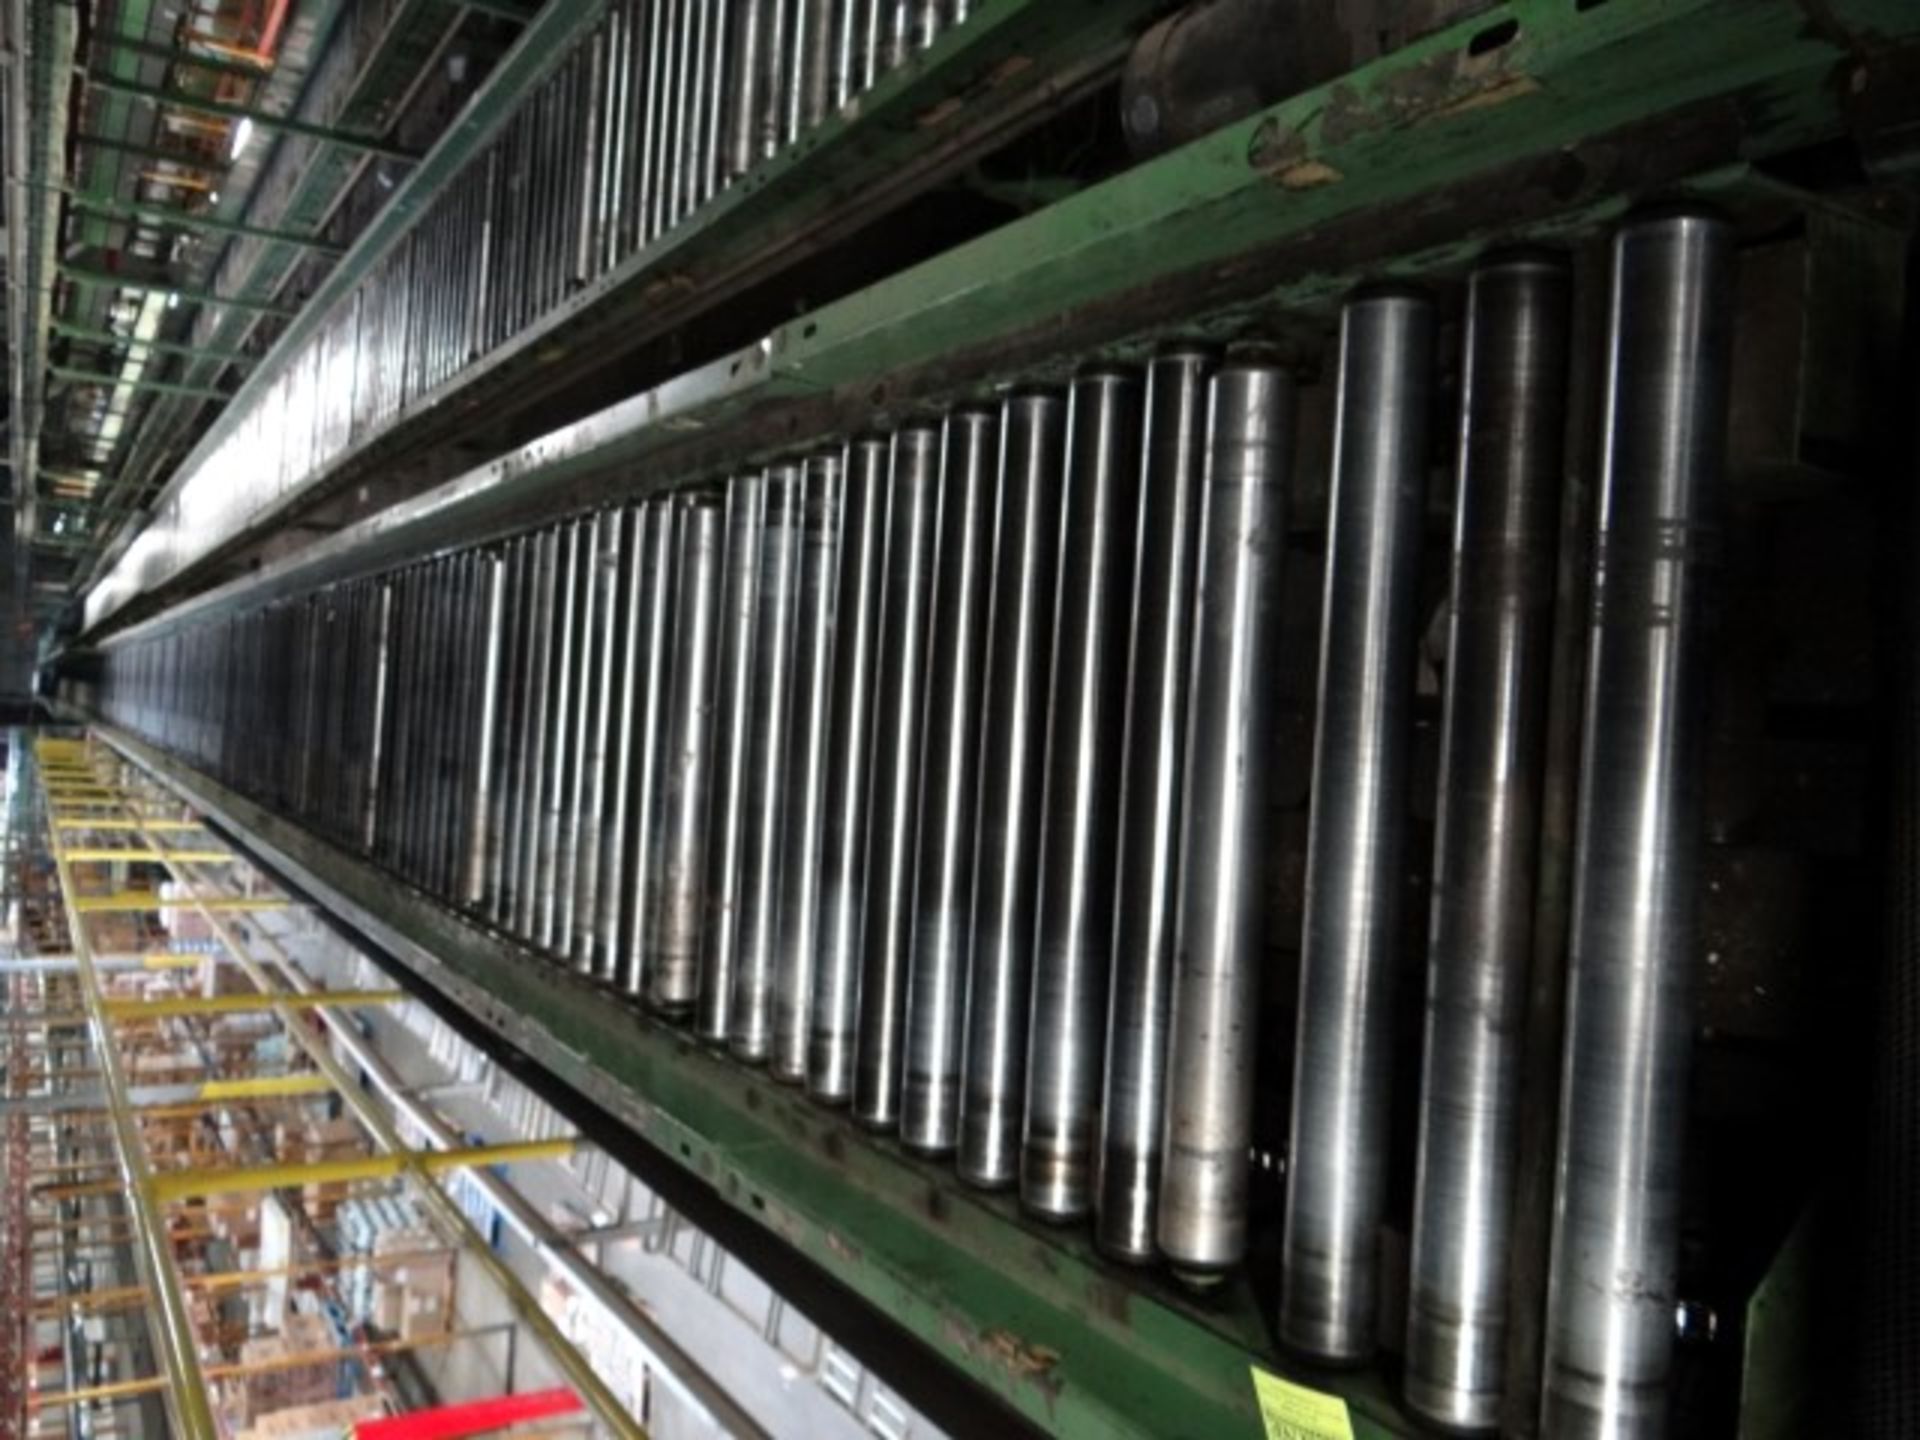 Line 5: Grocery Up Back Consisting of Approximately 200' of Roller, 270' of Roller, 12' Belt Incline